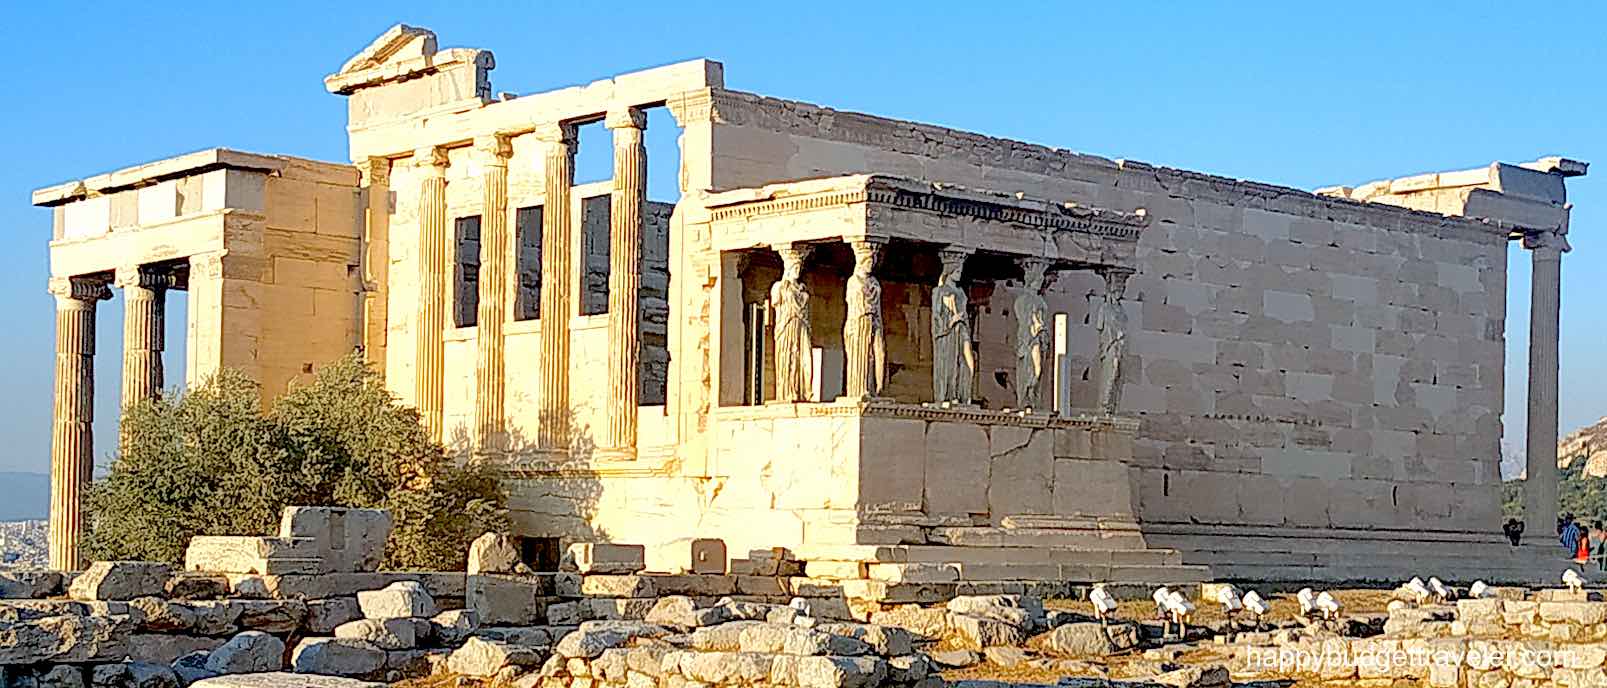 Picture of Erechtheon, the old temple dedicated to both Athena and Poseidon, Athens, Greece